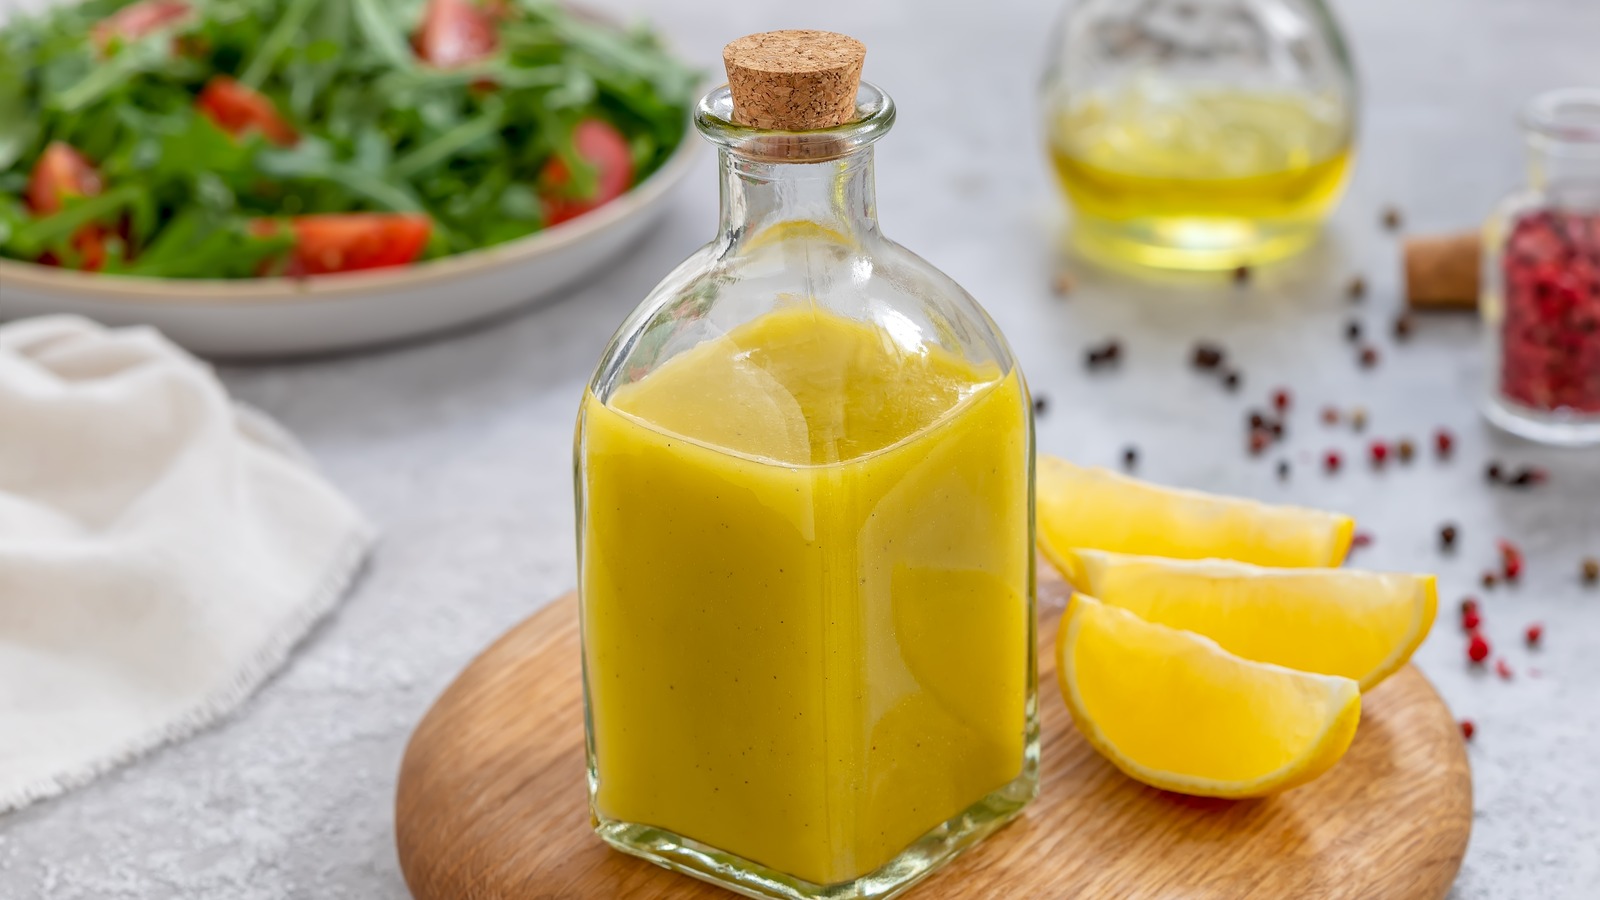 https://www.thedailymeal.com/img/gallery/an-immersion-blender-is-the-ultimate-tool-for-perfectly-creamy-salad-dressings/l-intro-1695072317.jpg